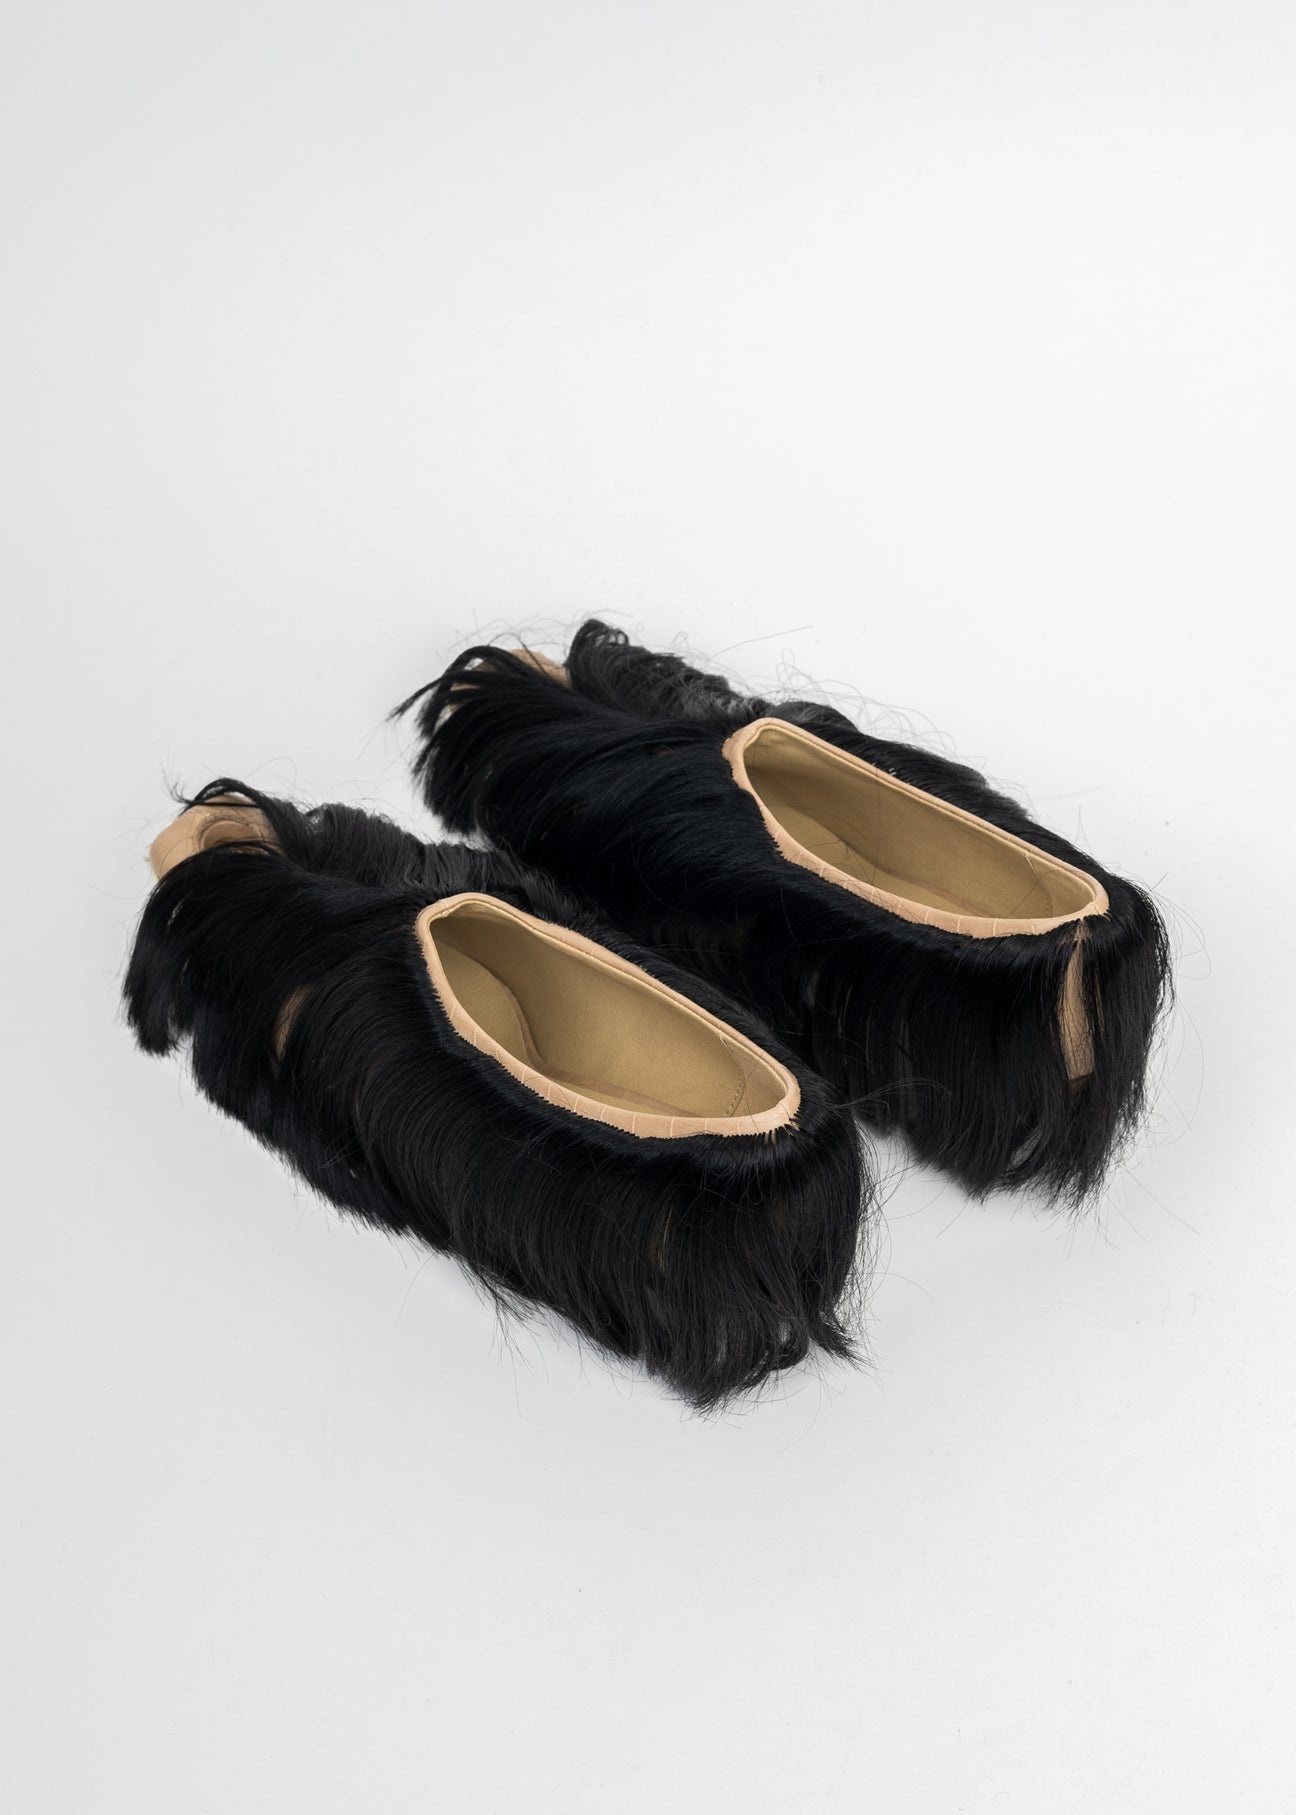 FICELLE WITH ONYX HAIR CUT-OUT HAIRY PUMP HEELS - 7